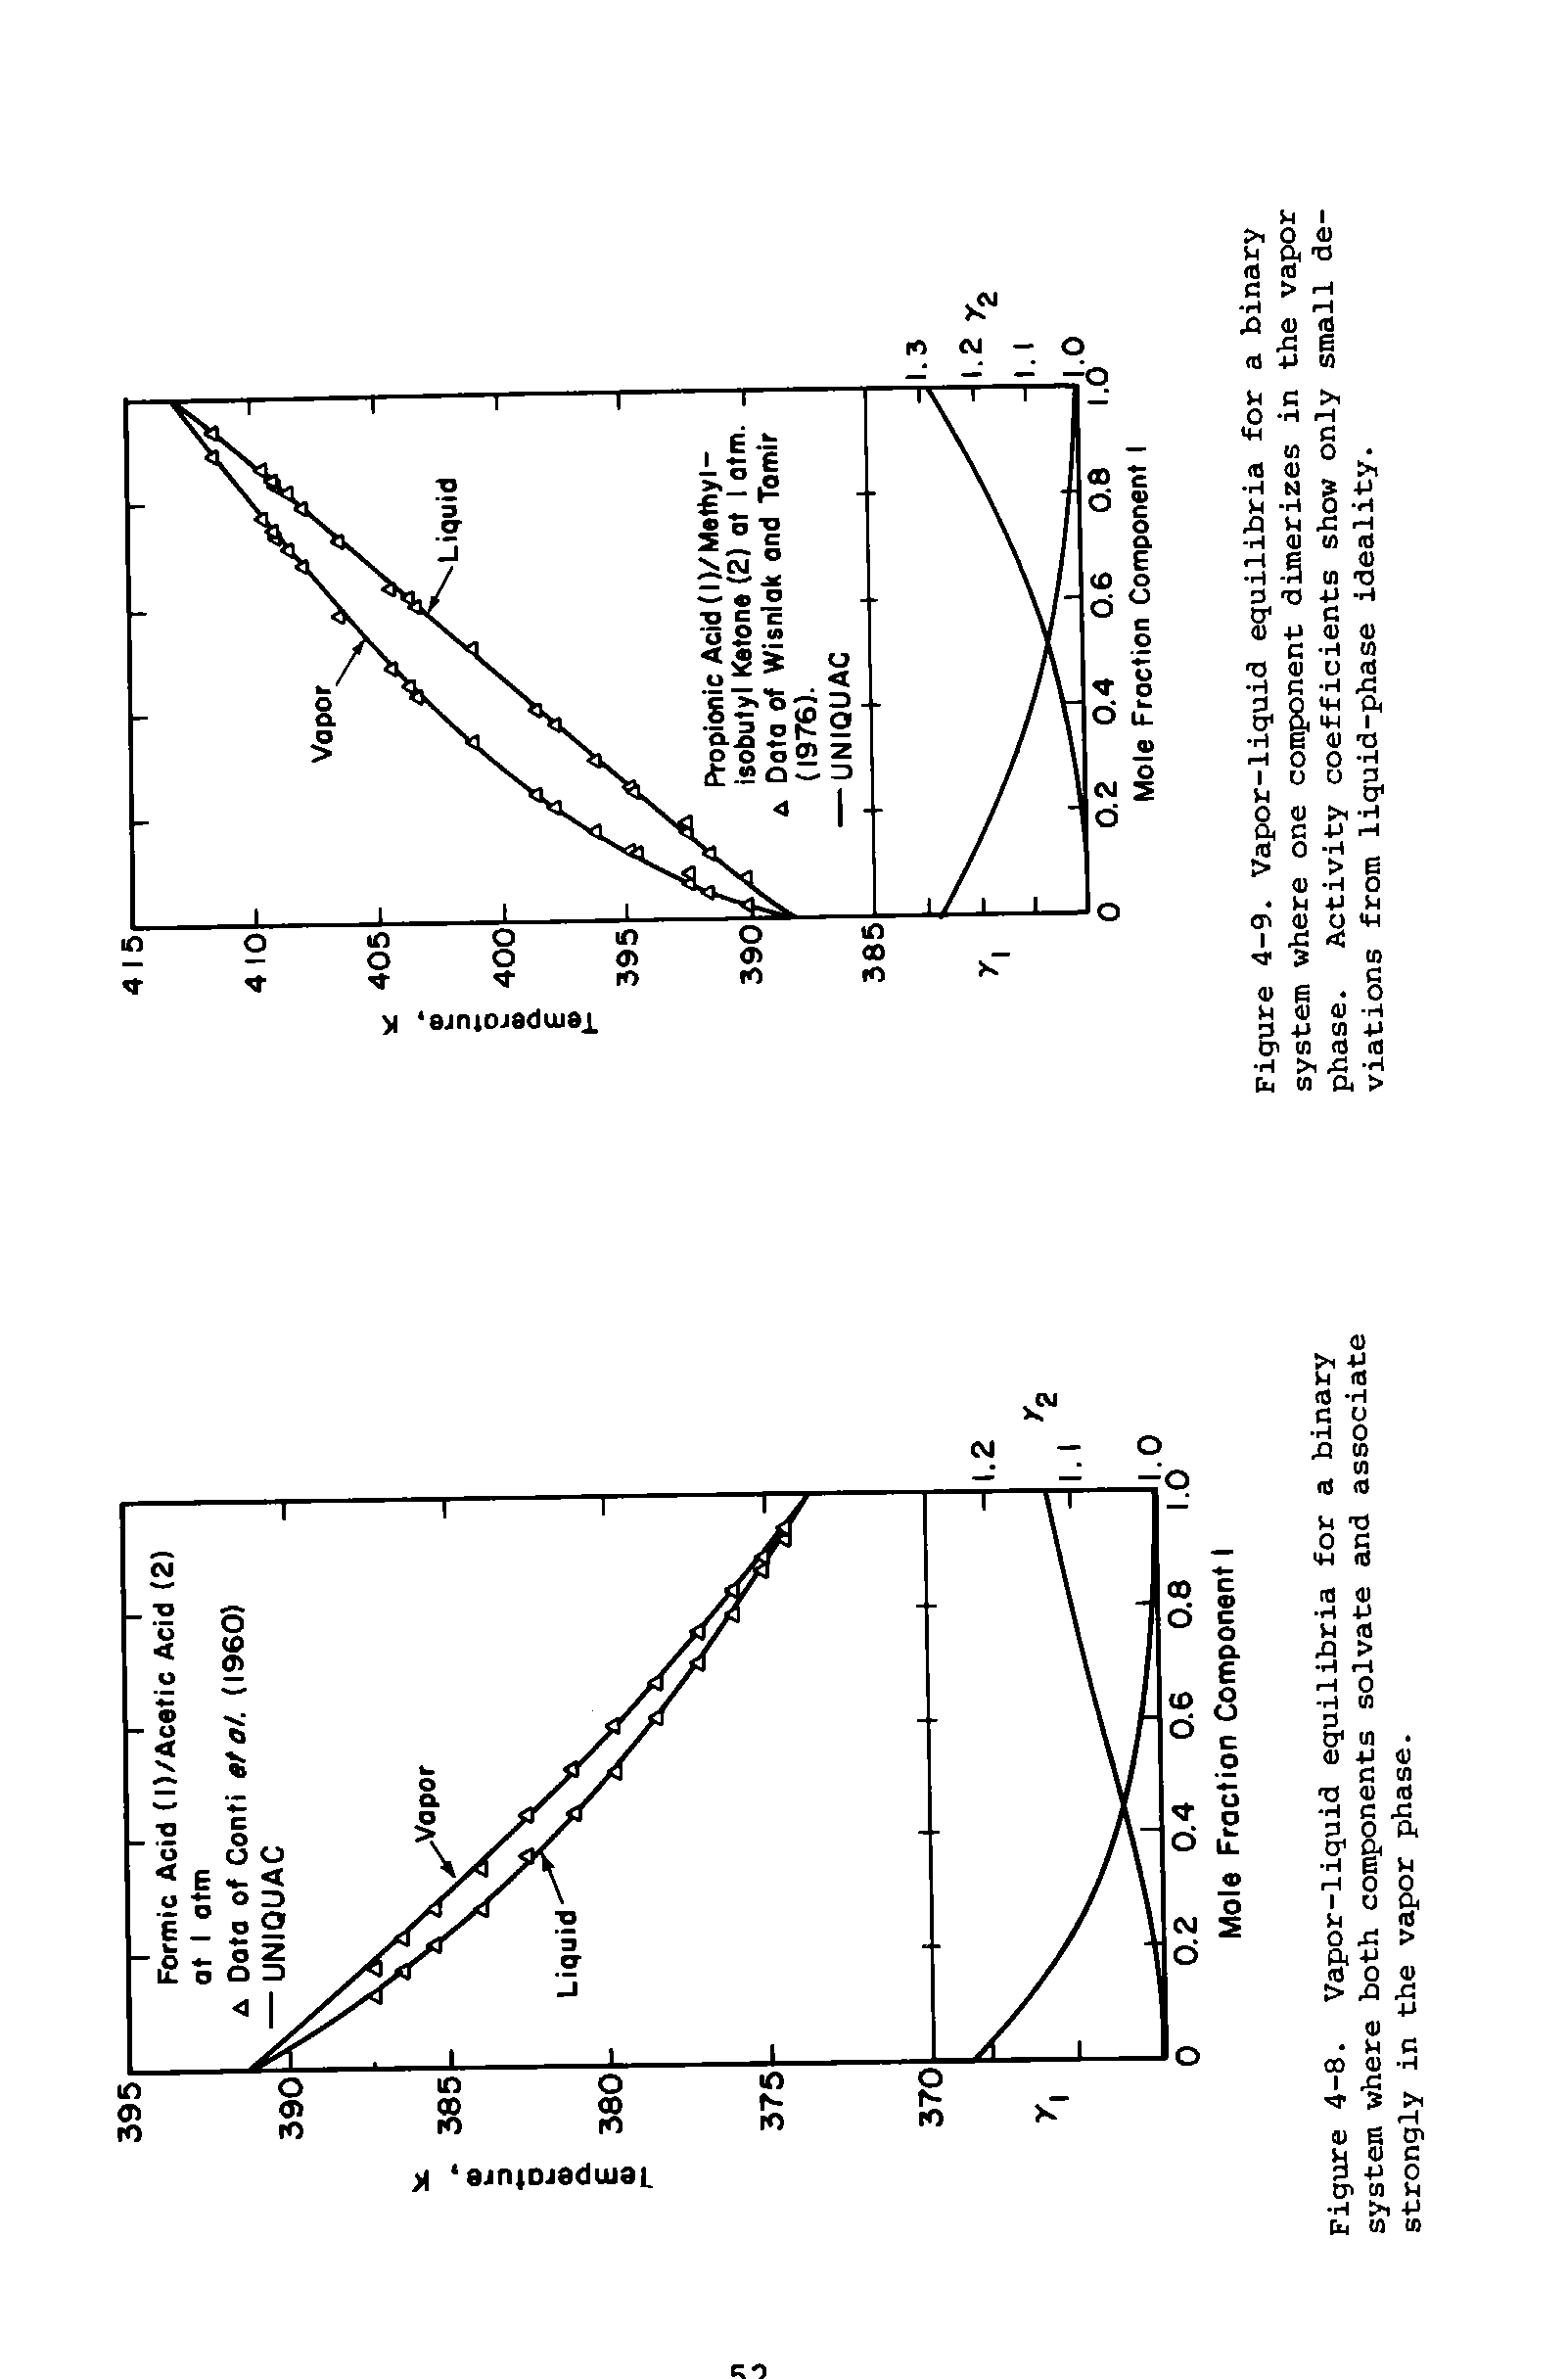 Figure 4-9. Vapor-liquid equilibria for a binary system where one component dimerizes in the vapor phase. Activity coefficients show only small deviations from liquid-phase ideality.